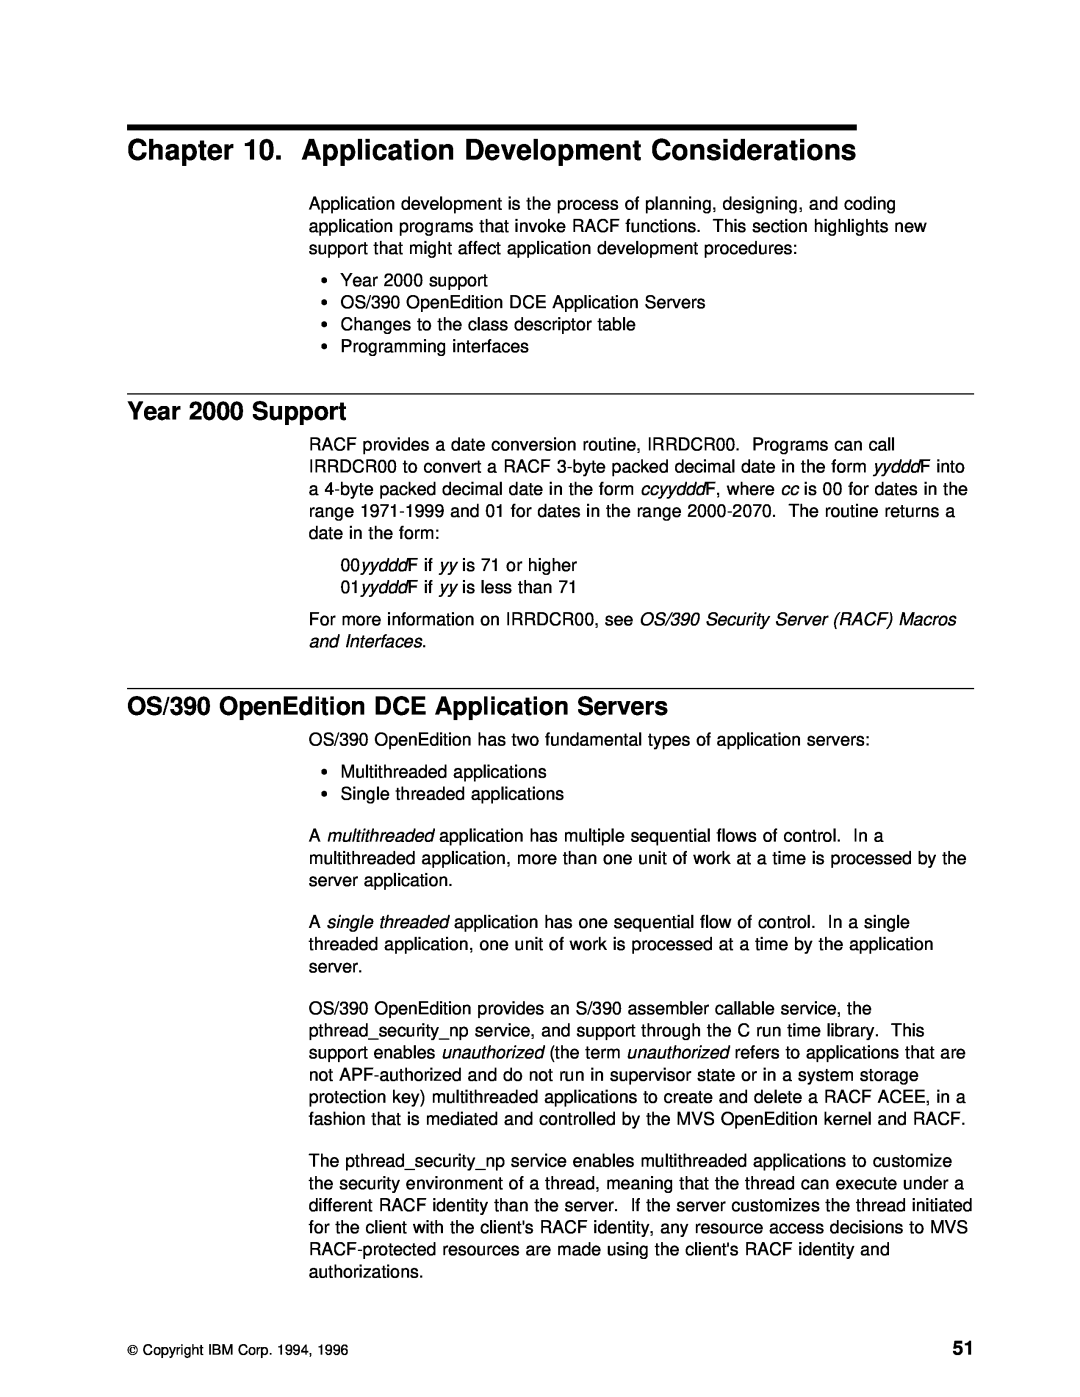 IBM GC28-1920-01 manual Application Development Considerations, Support, Servers, 01yydddF, Year, Security, Racf, Macros 